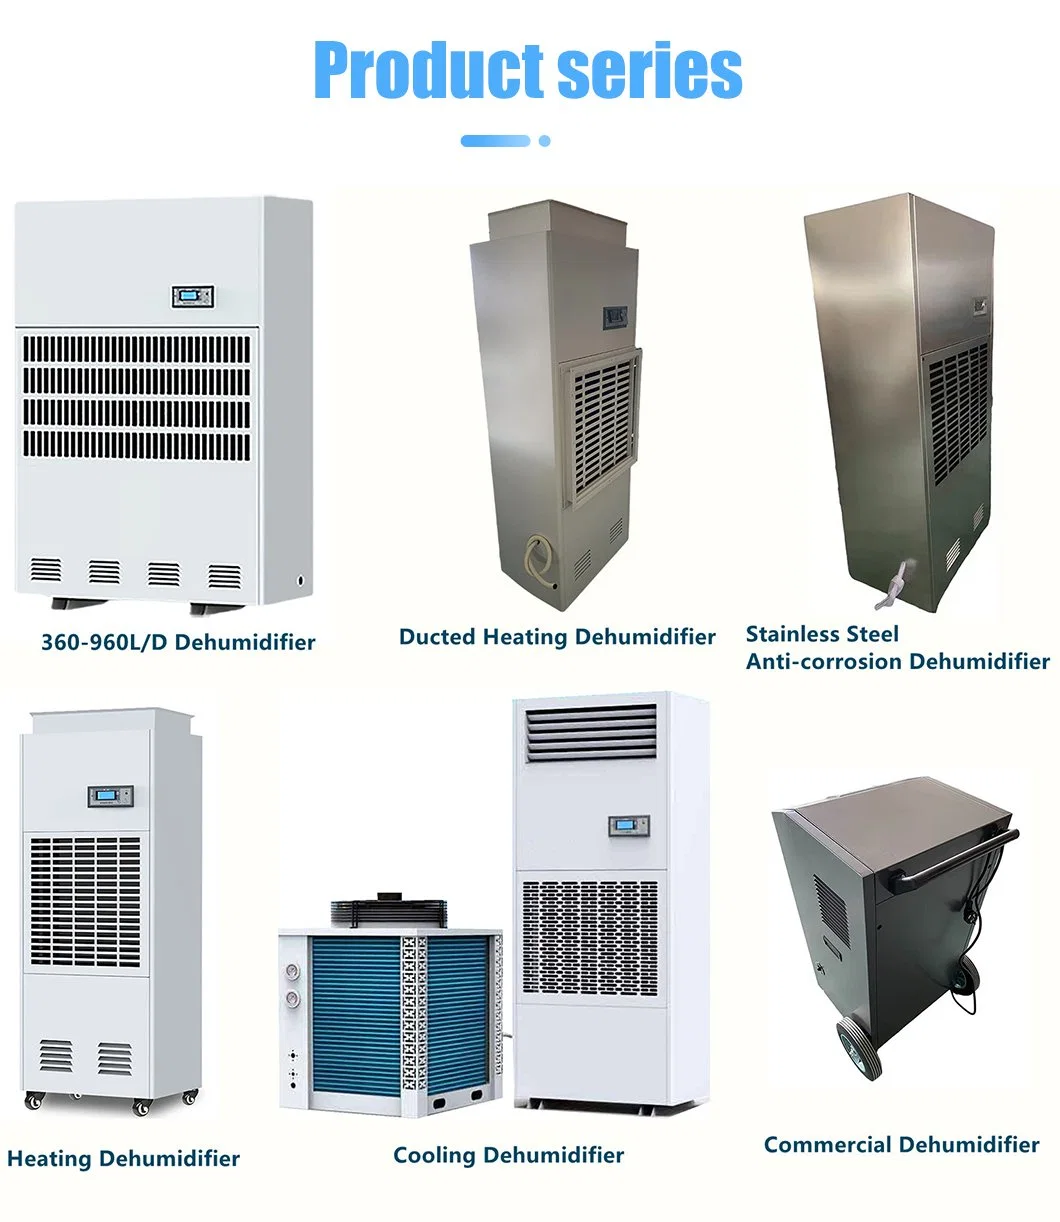 90L Full House Super Quiet Cheap Commercial Global Dehumidifier Industrial for Basement and Whole House